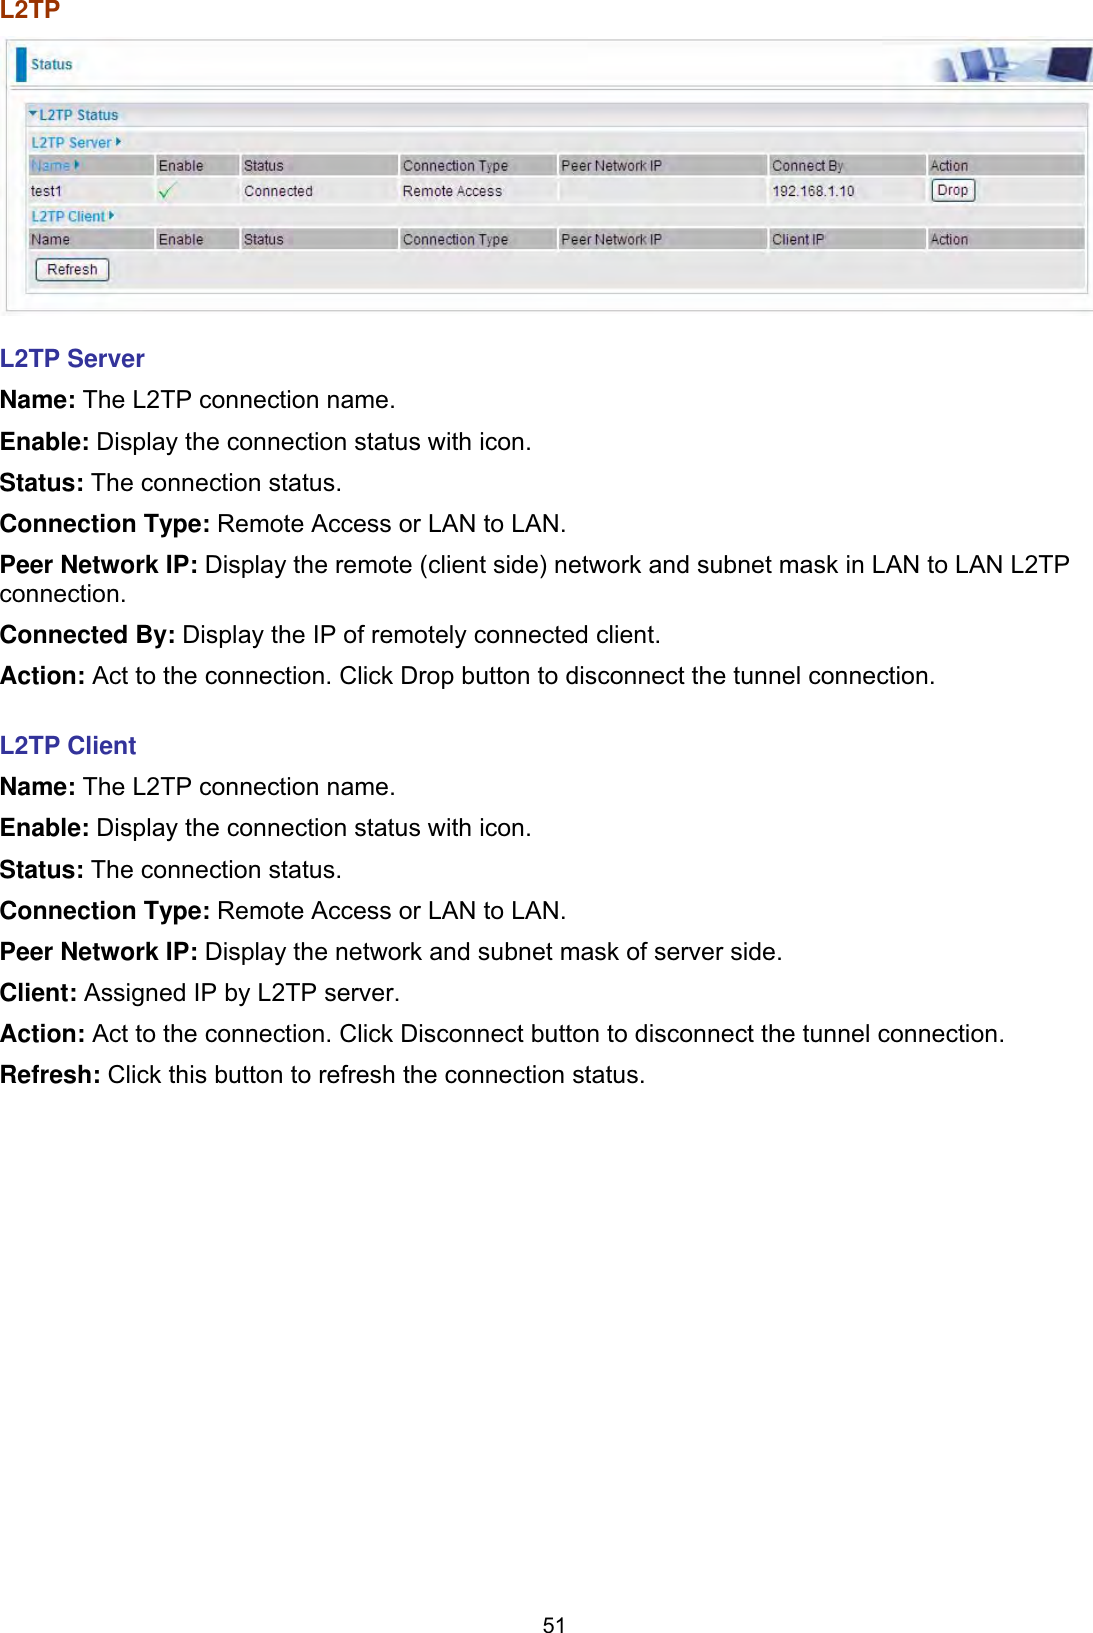 51L2TP  L2TP Server Name: The L2TP connection name. Enable: Display the connection status with icon. Status: The connection status. Connection Type: Remote Access or LAN to LAN. Peer Network IP: Display the remote (client side) network and subnet mask in LAN to LAN L2TP connection.Connected By: Display the IP of remotely connected client. Action: Act to the connection. Click Drop button to disconnect the tunnel connection. L2TP Client Name: The L2TP connection name. Enable: Display the connection status with icon. Status: The connection status. Connection Type: Remote Access or LAN to LAN. Peer Network IP: Display the network and subnet mask of server side.Client: Assigned IP by L2TP server. Action: Act to the connection. Click Disconnect button to disconnect the tunnel connection. Refresh: Click this button to refresh the connection status.